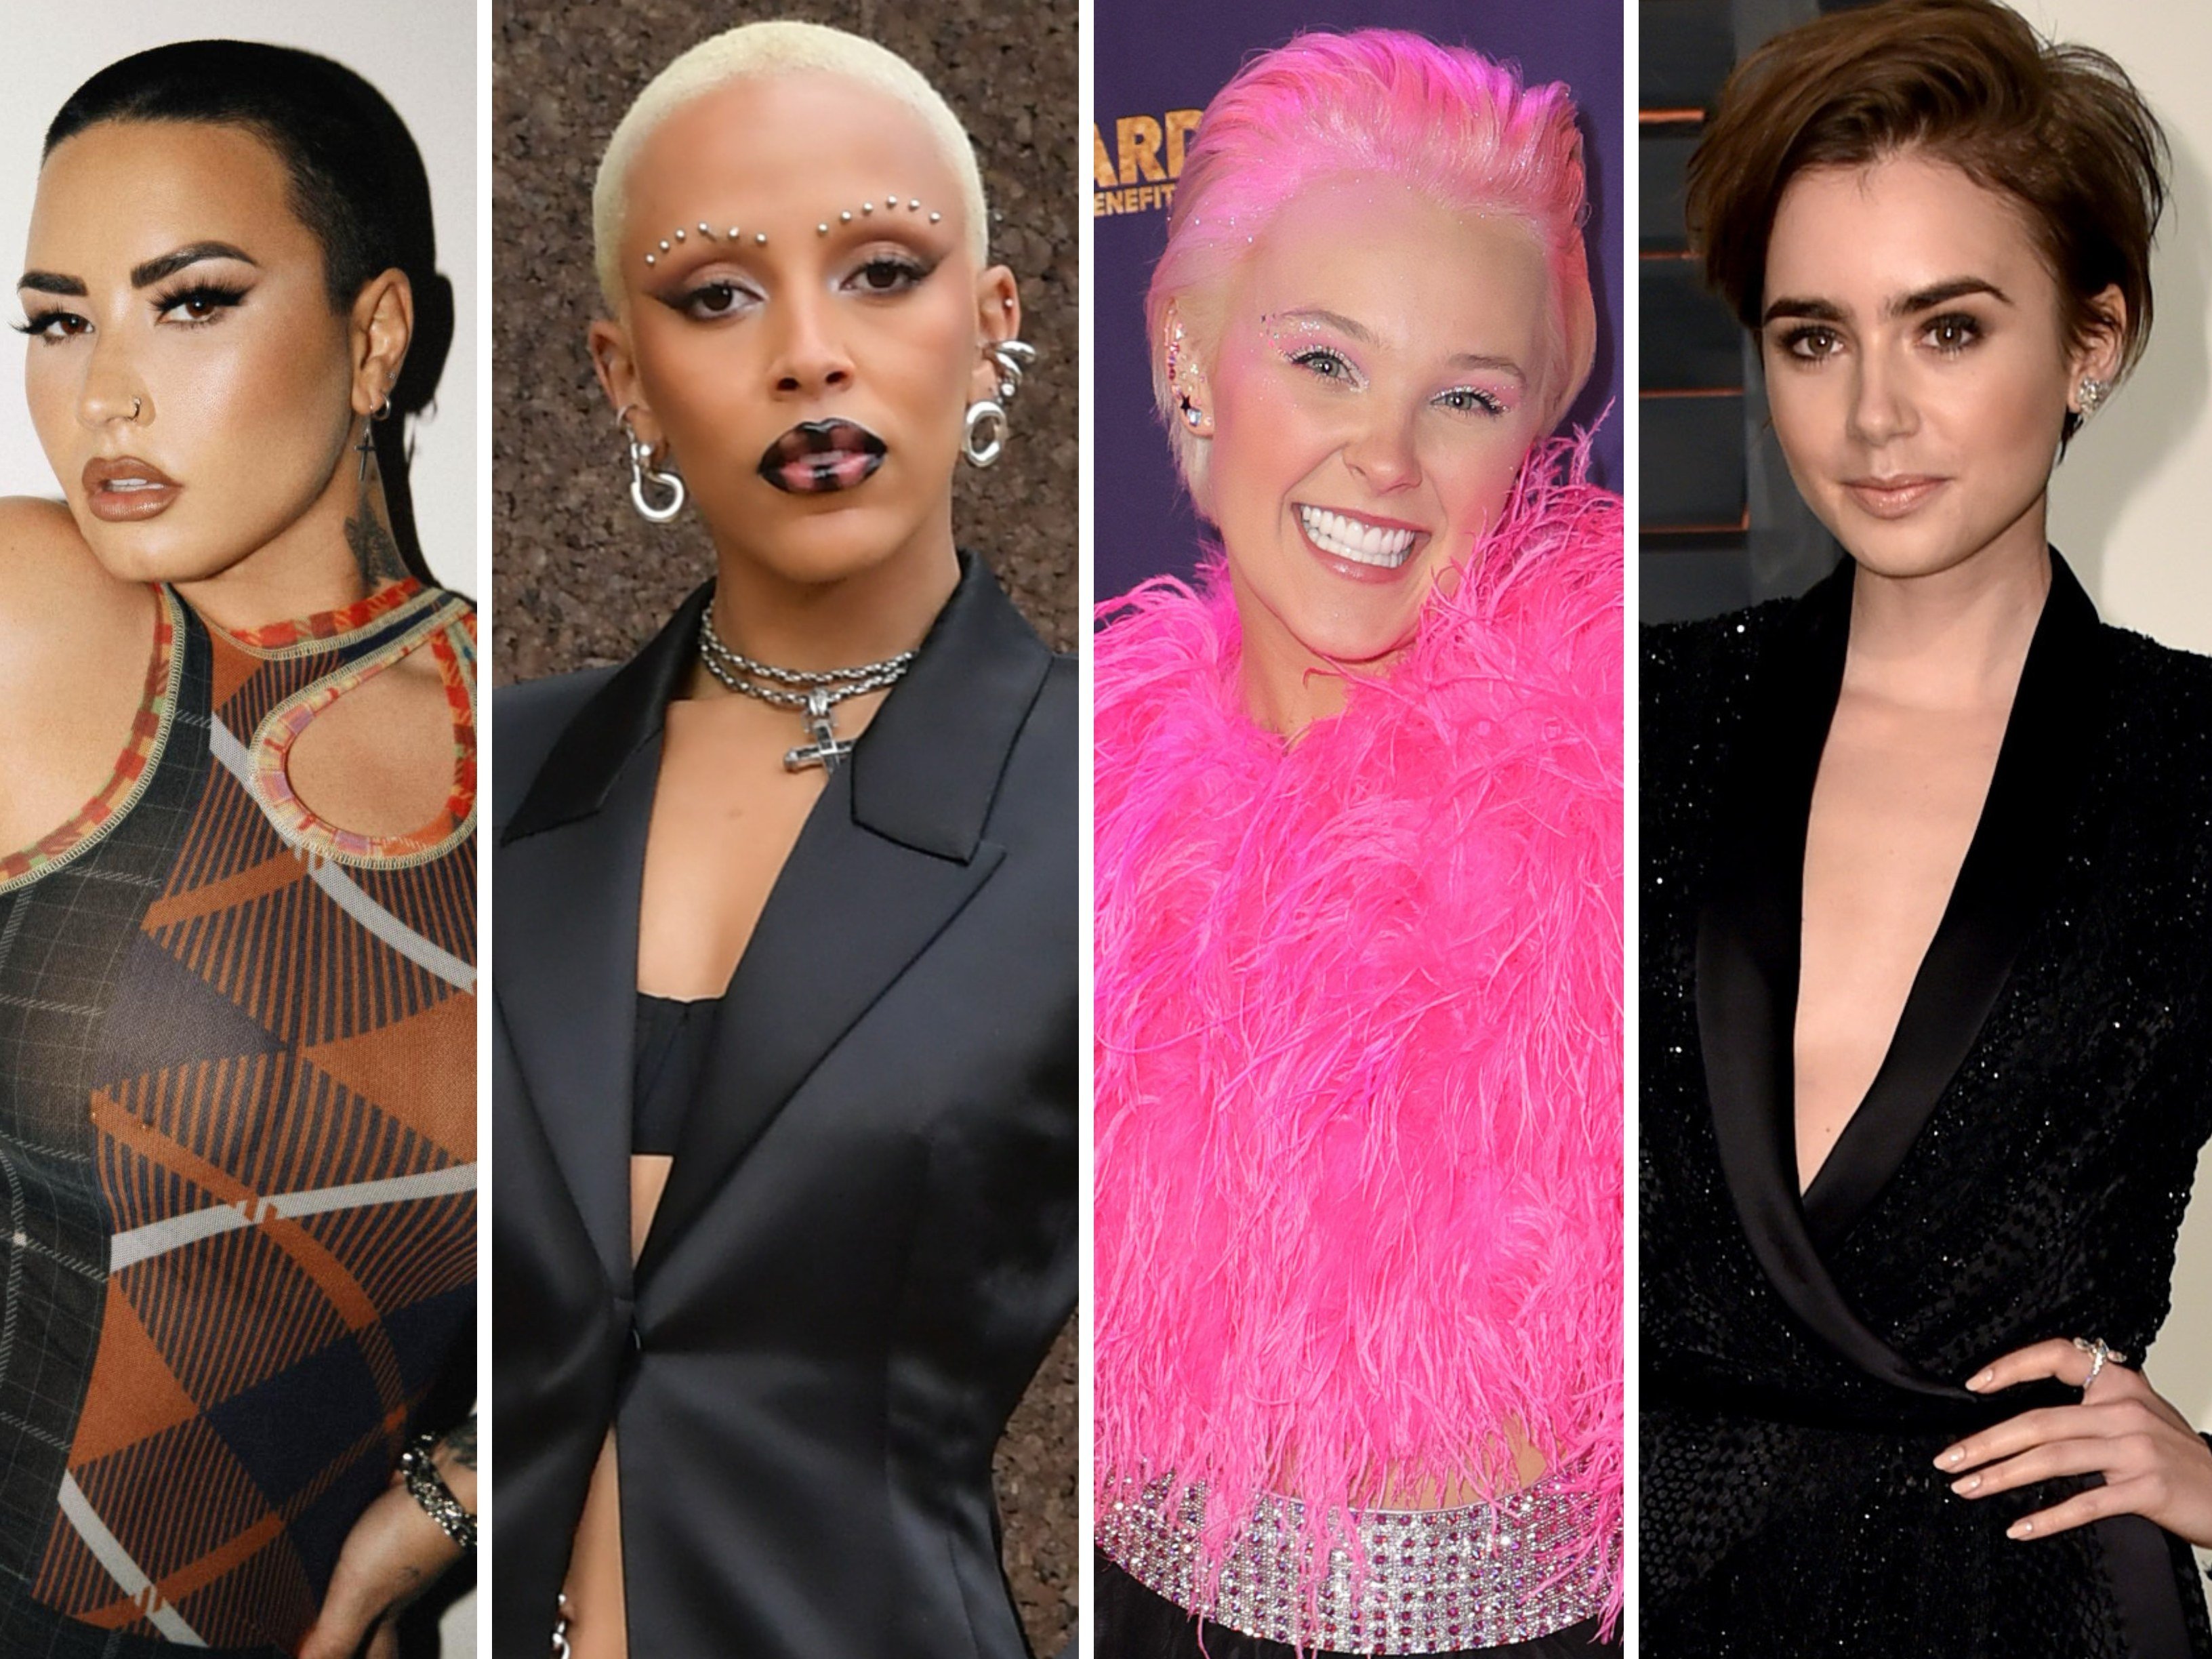 Six celebrity hair transformations, from (left to right) Demi Lovato and Doja Cat, to JoJo Siwa and Lily Collins. Photos: @ddlovato/Instagram, WireImage, Getty Images